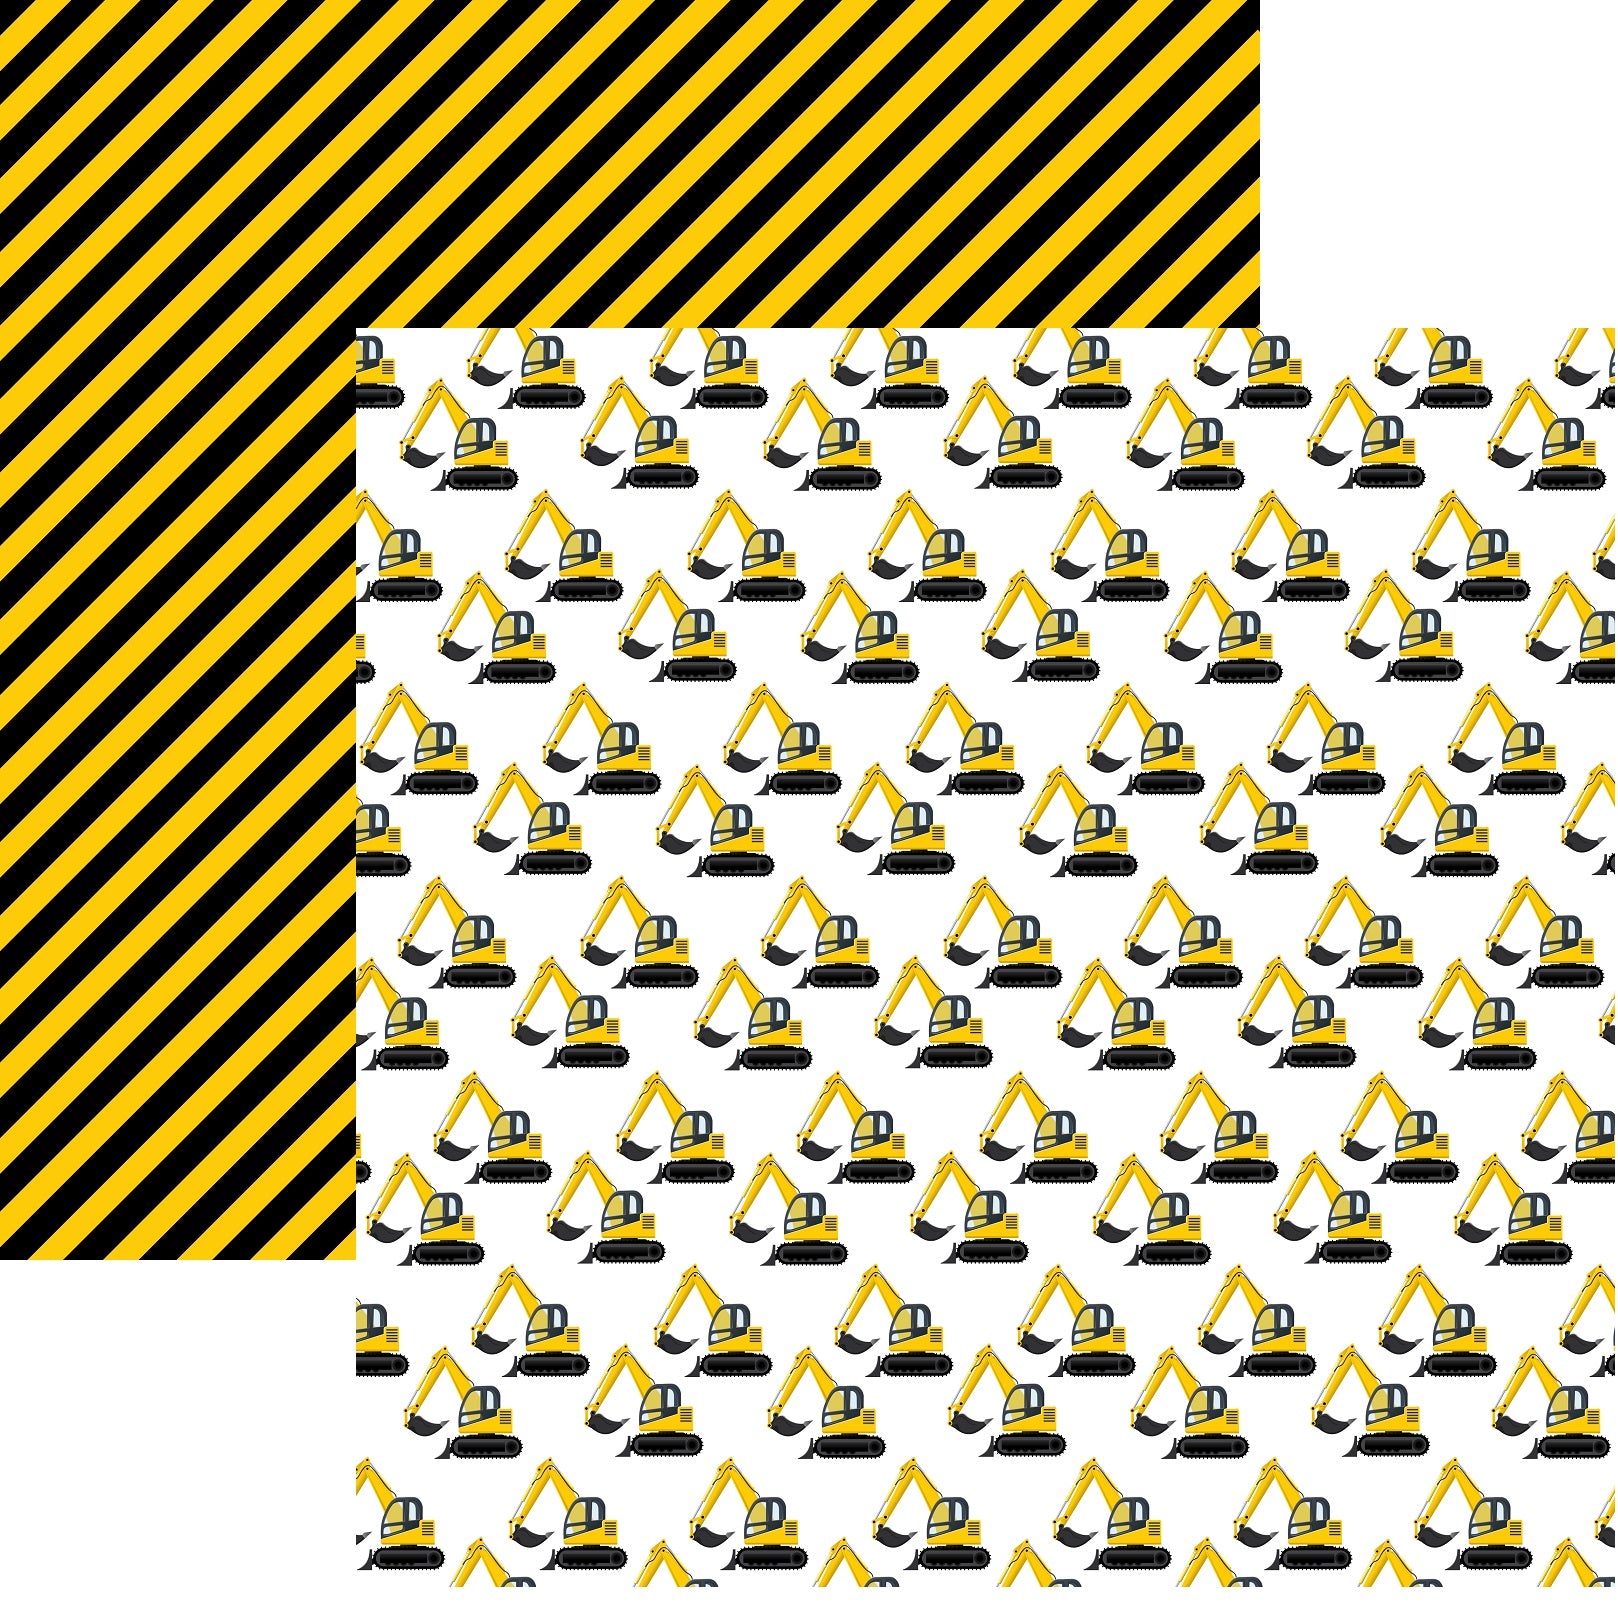 Excavator Truck Construction Trucks Pattern Wrapping Paper